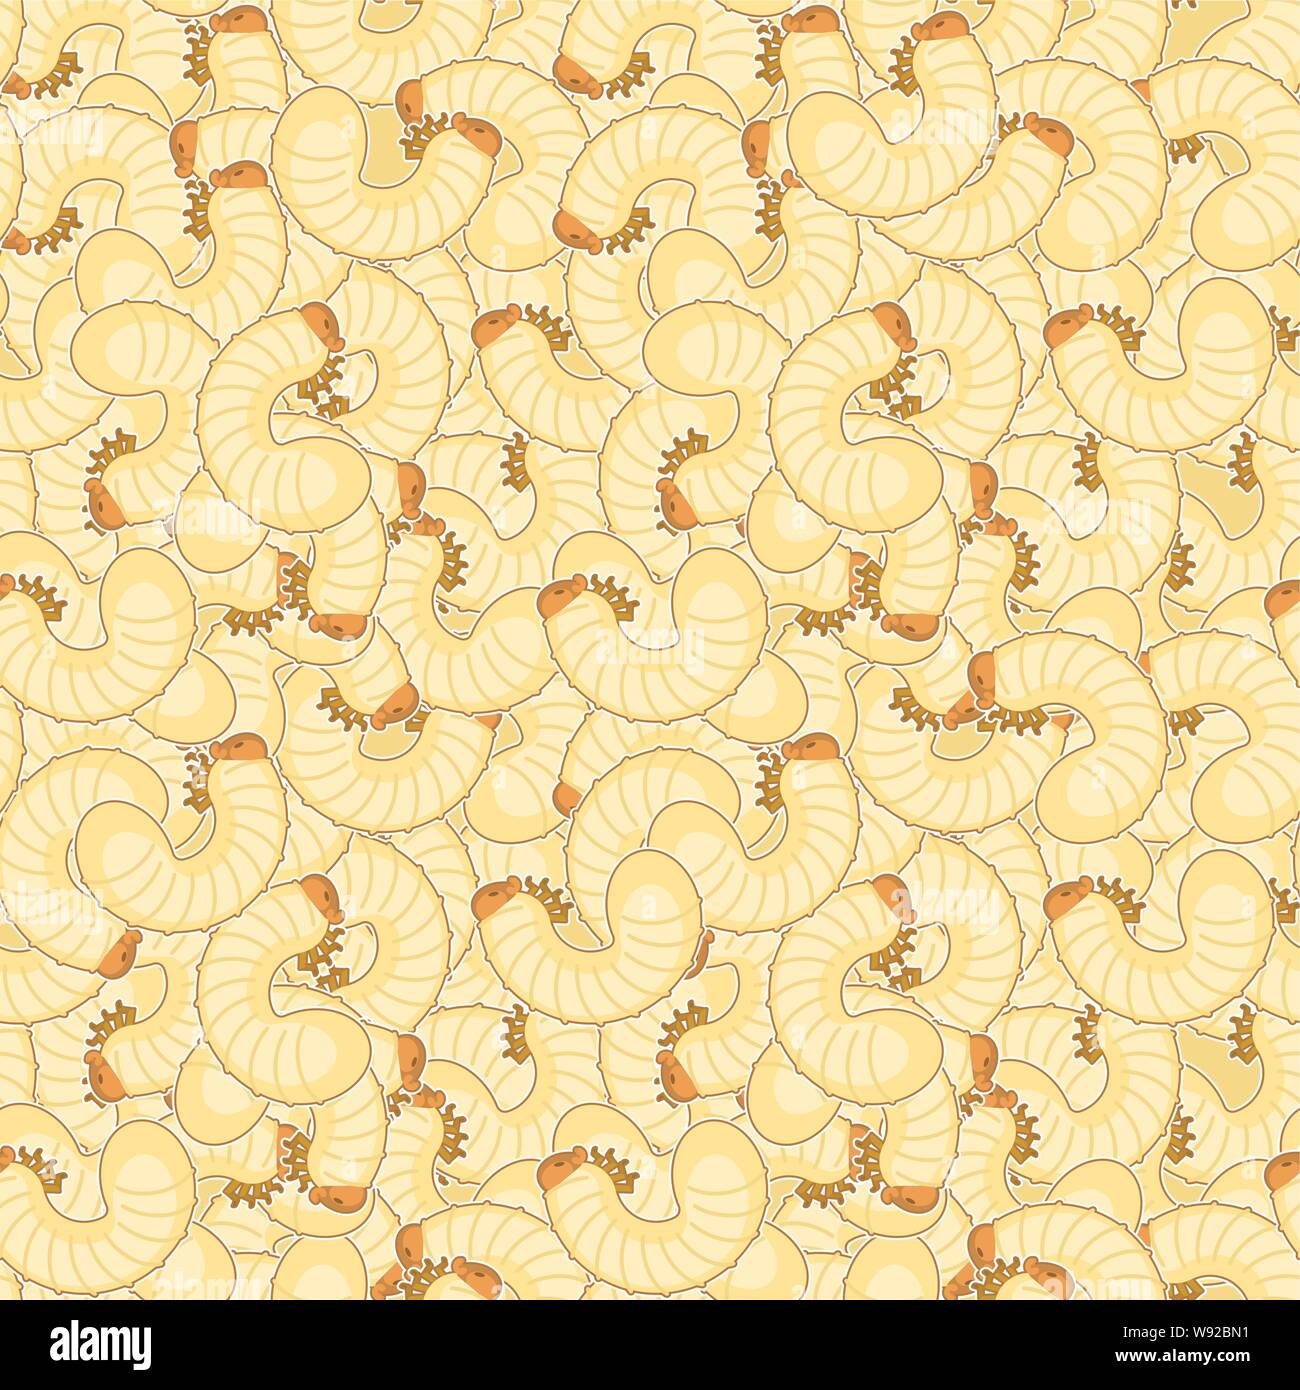 Maggot pattern seamless. Beetle larva background. Insect vector texture Stock Vector